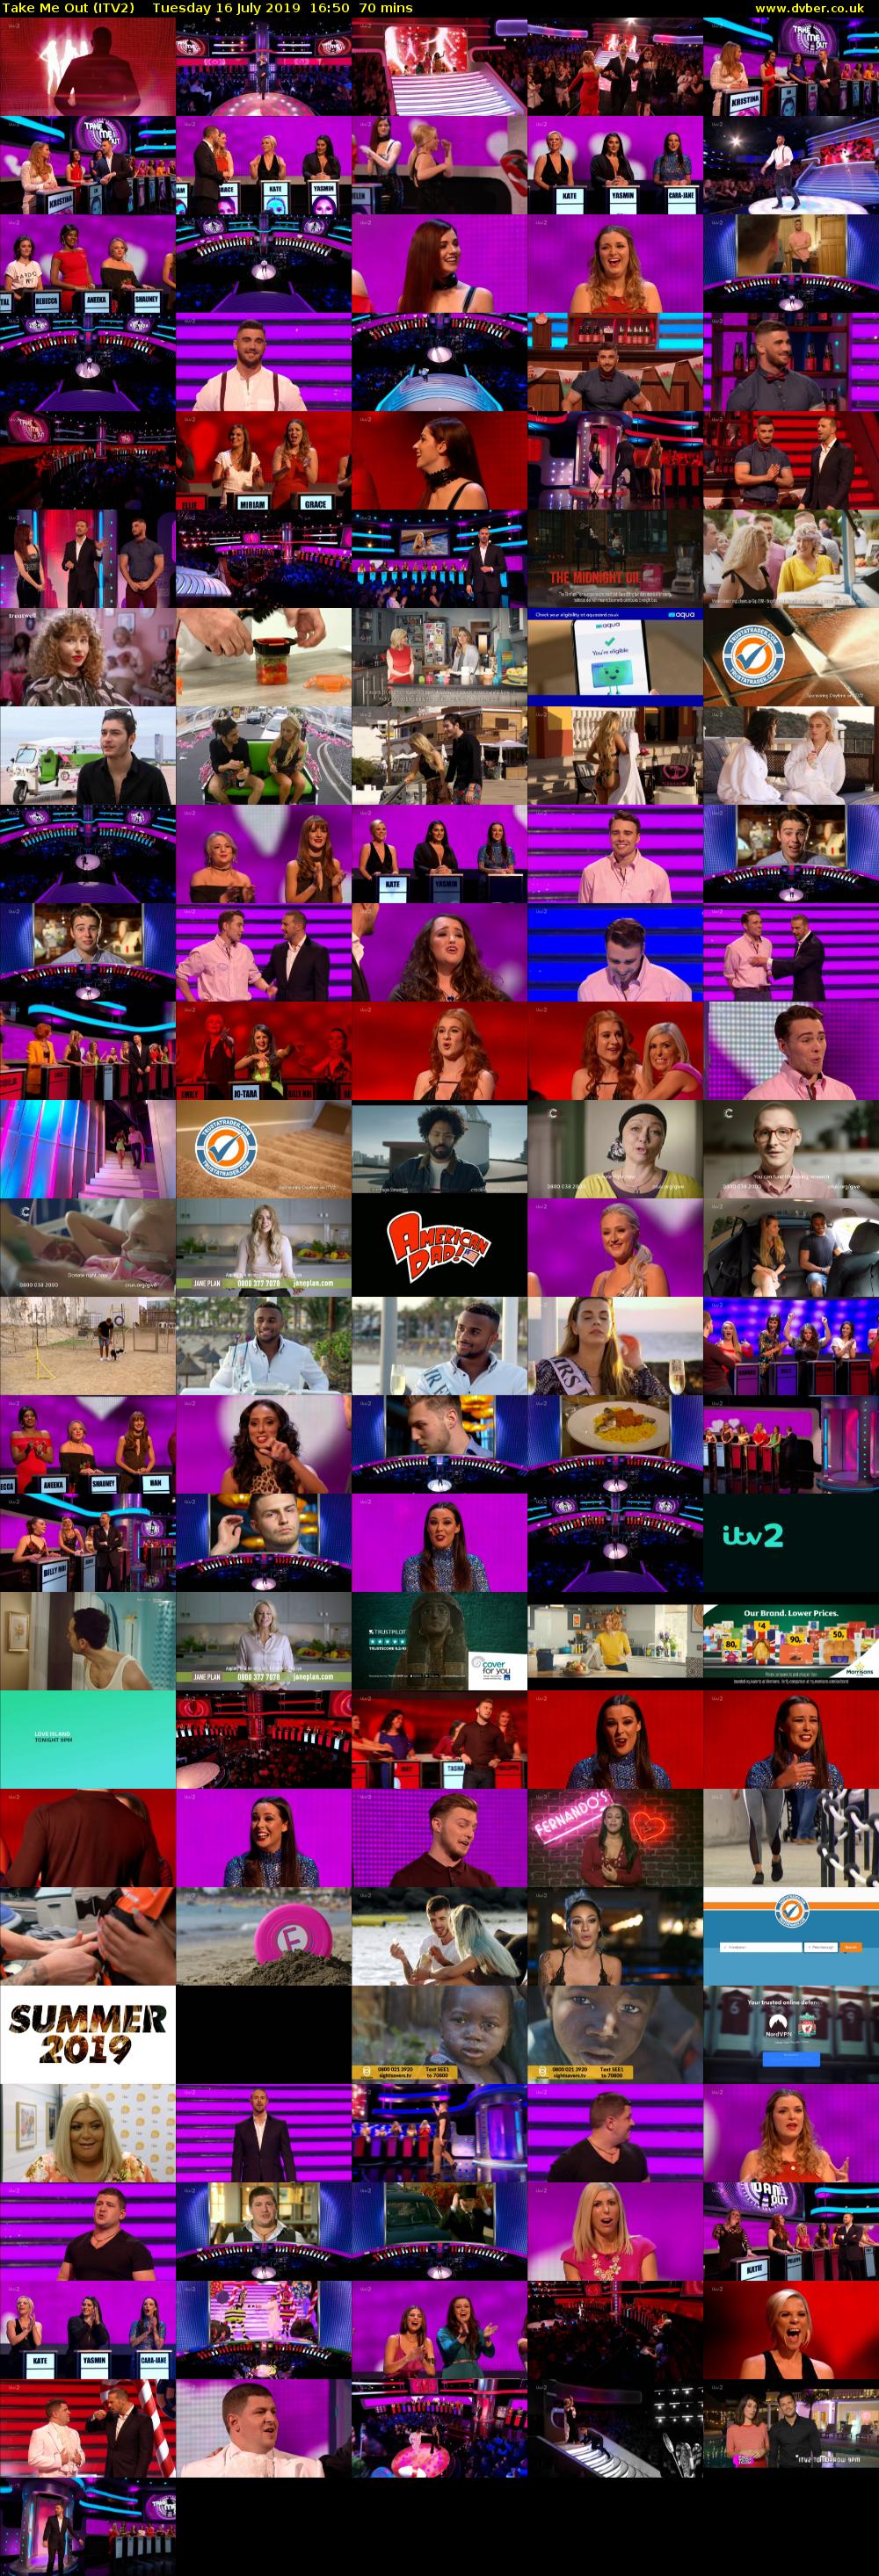 Take Me Out (ITV2) Tuesday 16 July 2019 16:50 - 18:00